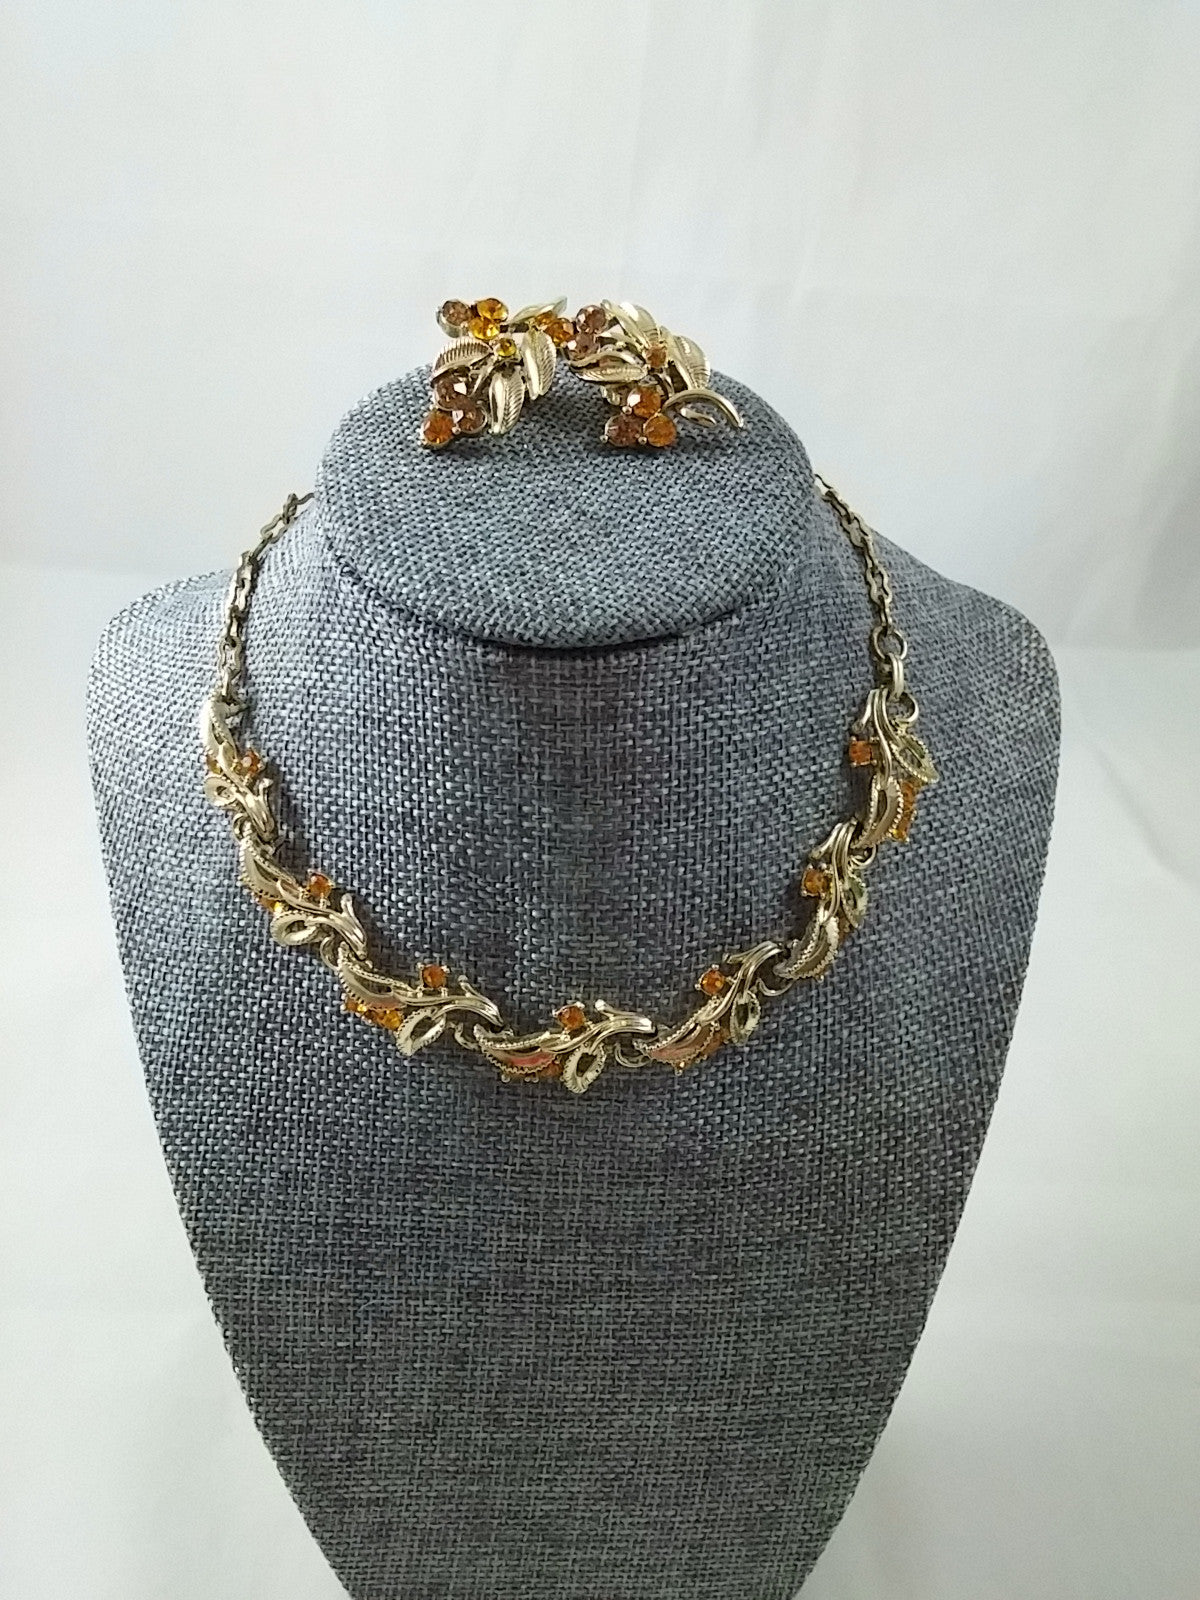 Vintage Coro Necklace and Earring Demi Gold Tone Leaf Clusters w/ Amber Rhinestone Accents - Dirty 30 Vintage